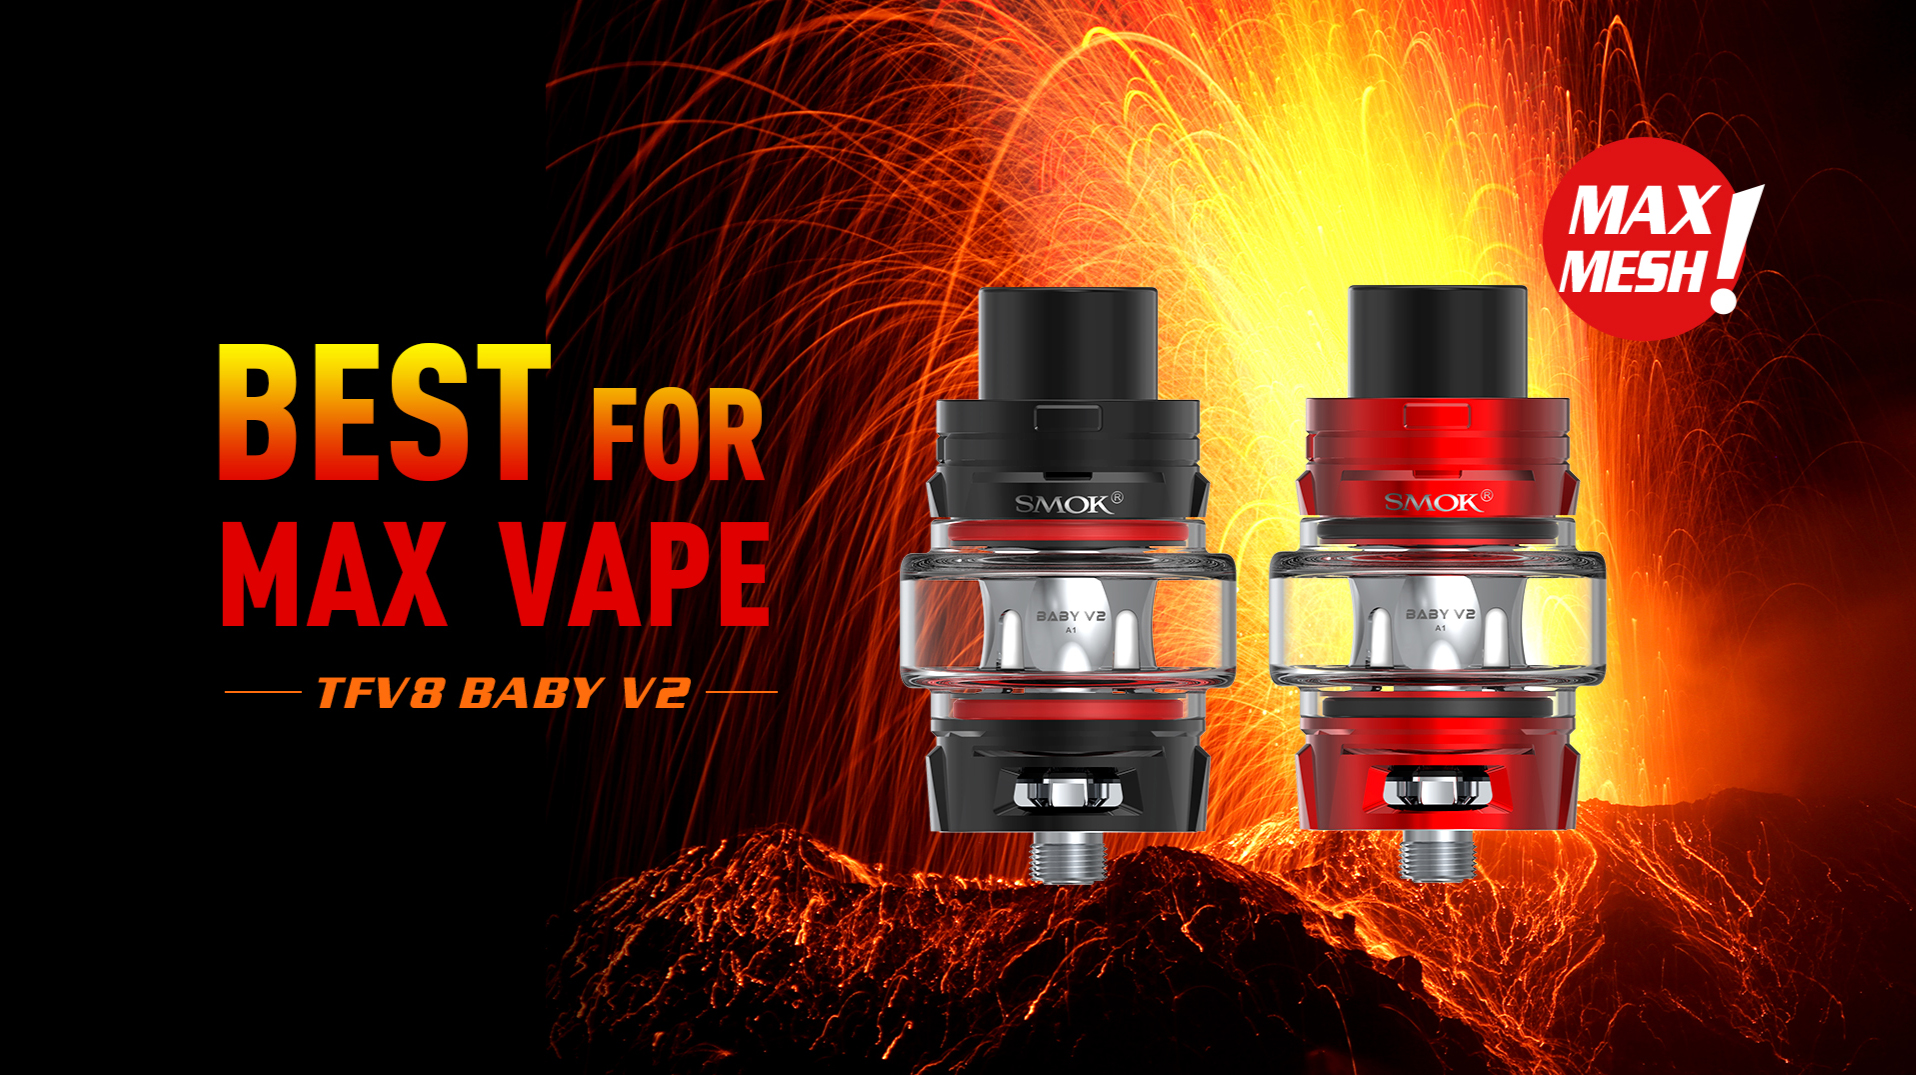 TFV8 Baby V2 is Best fit of SMOK Species Kit